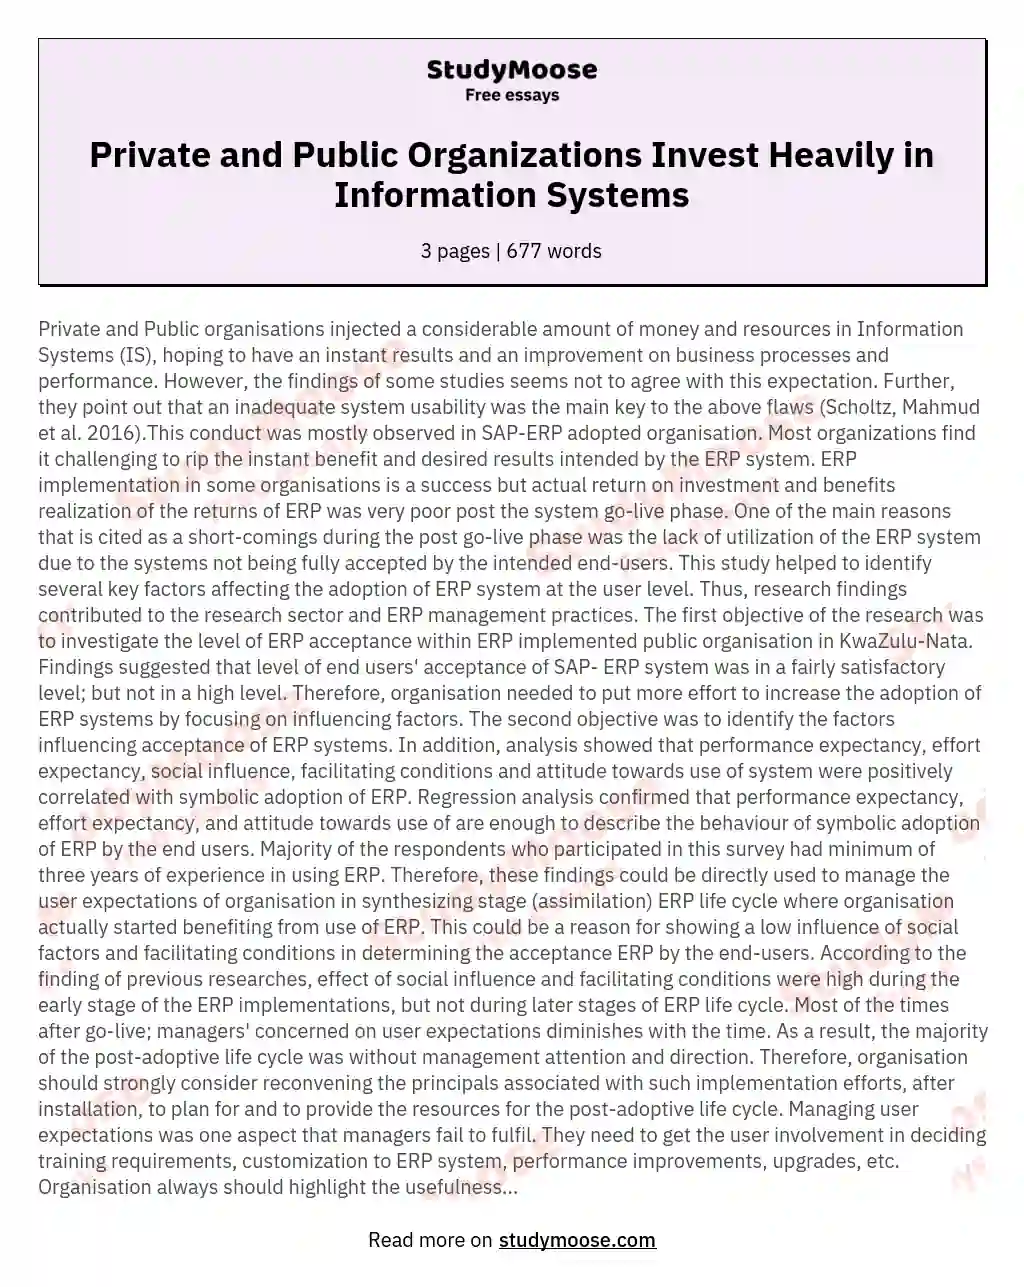 Private and Public Organizations Invest Heavily in Information Systems essay